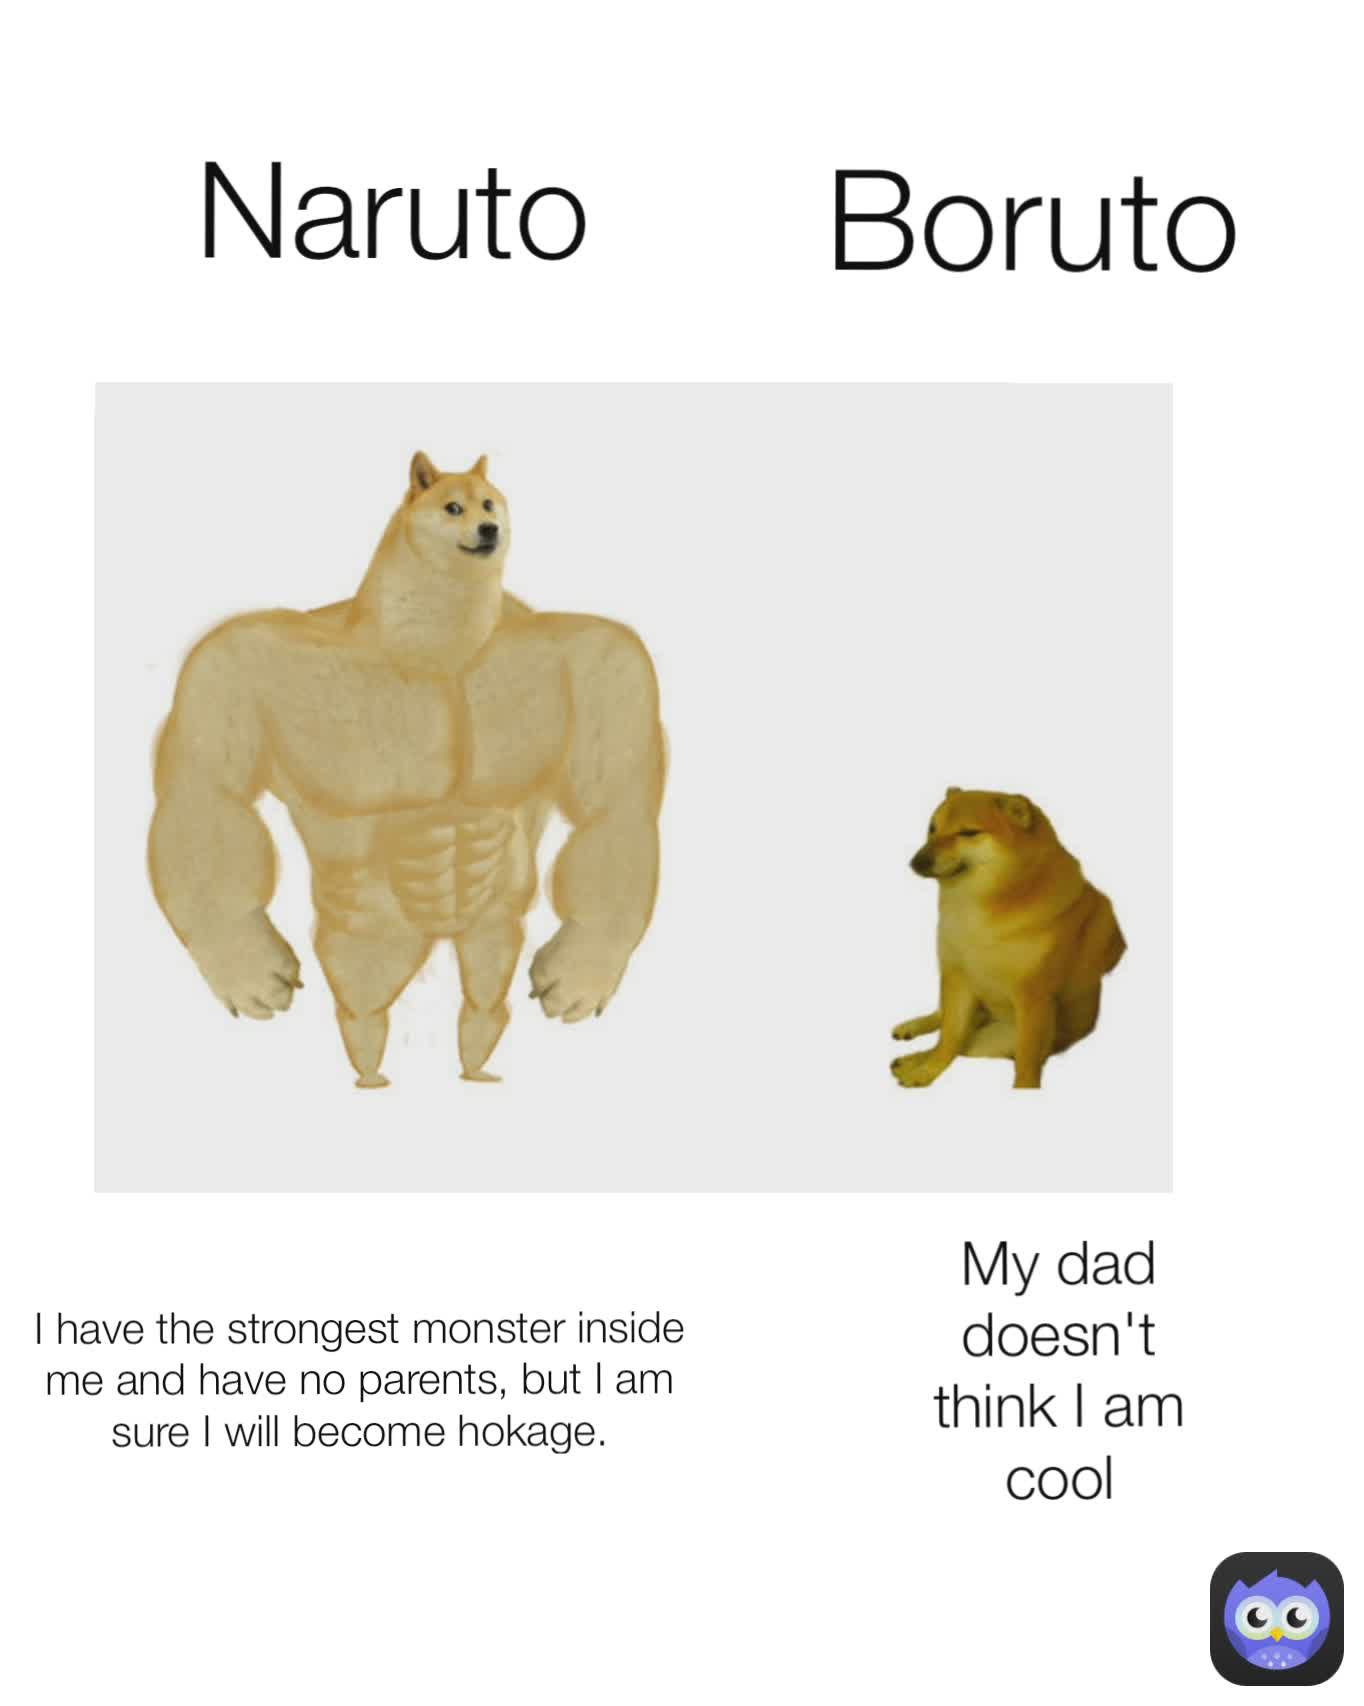 My dad doesn't think I am cool Naruto Boruto I have the strongest monster inside me and have no parents, but I am sure I will become hokage.